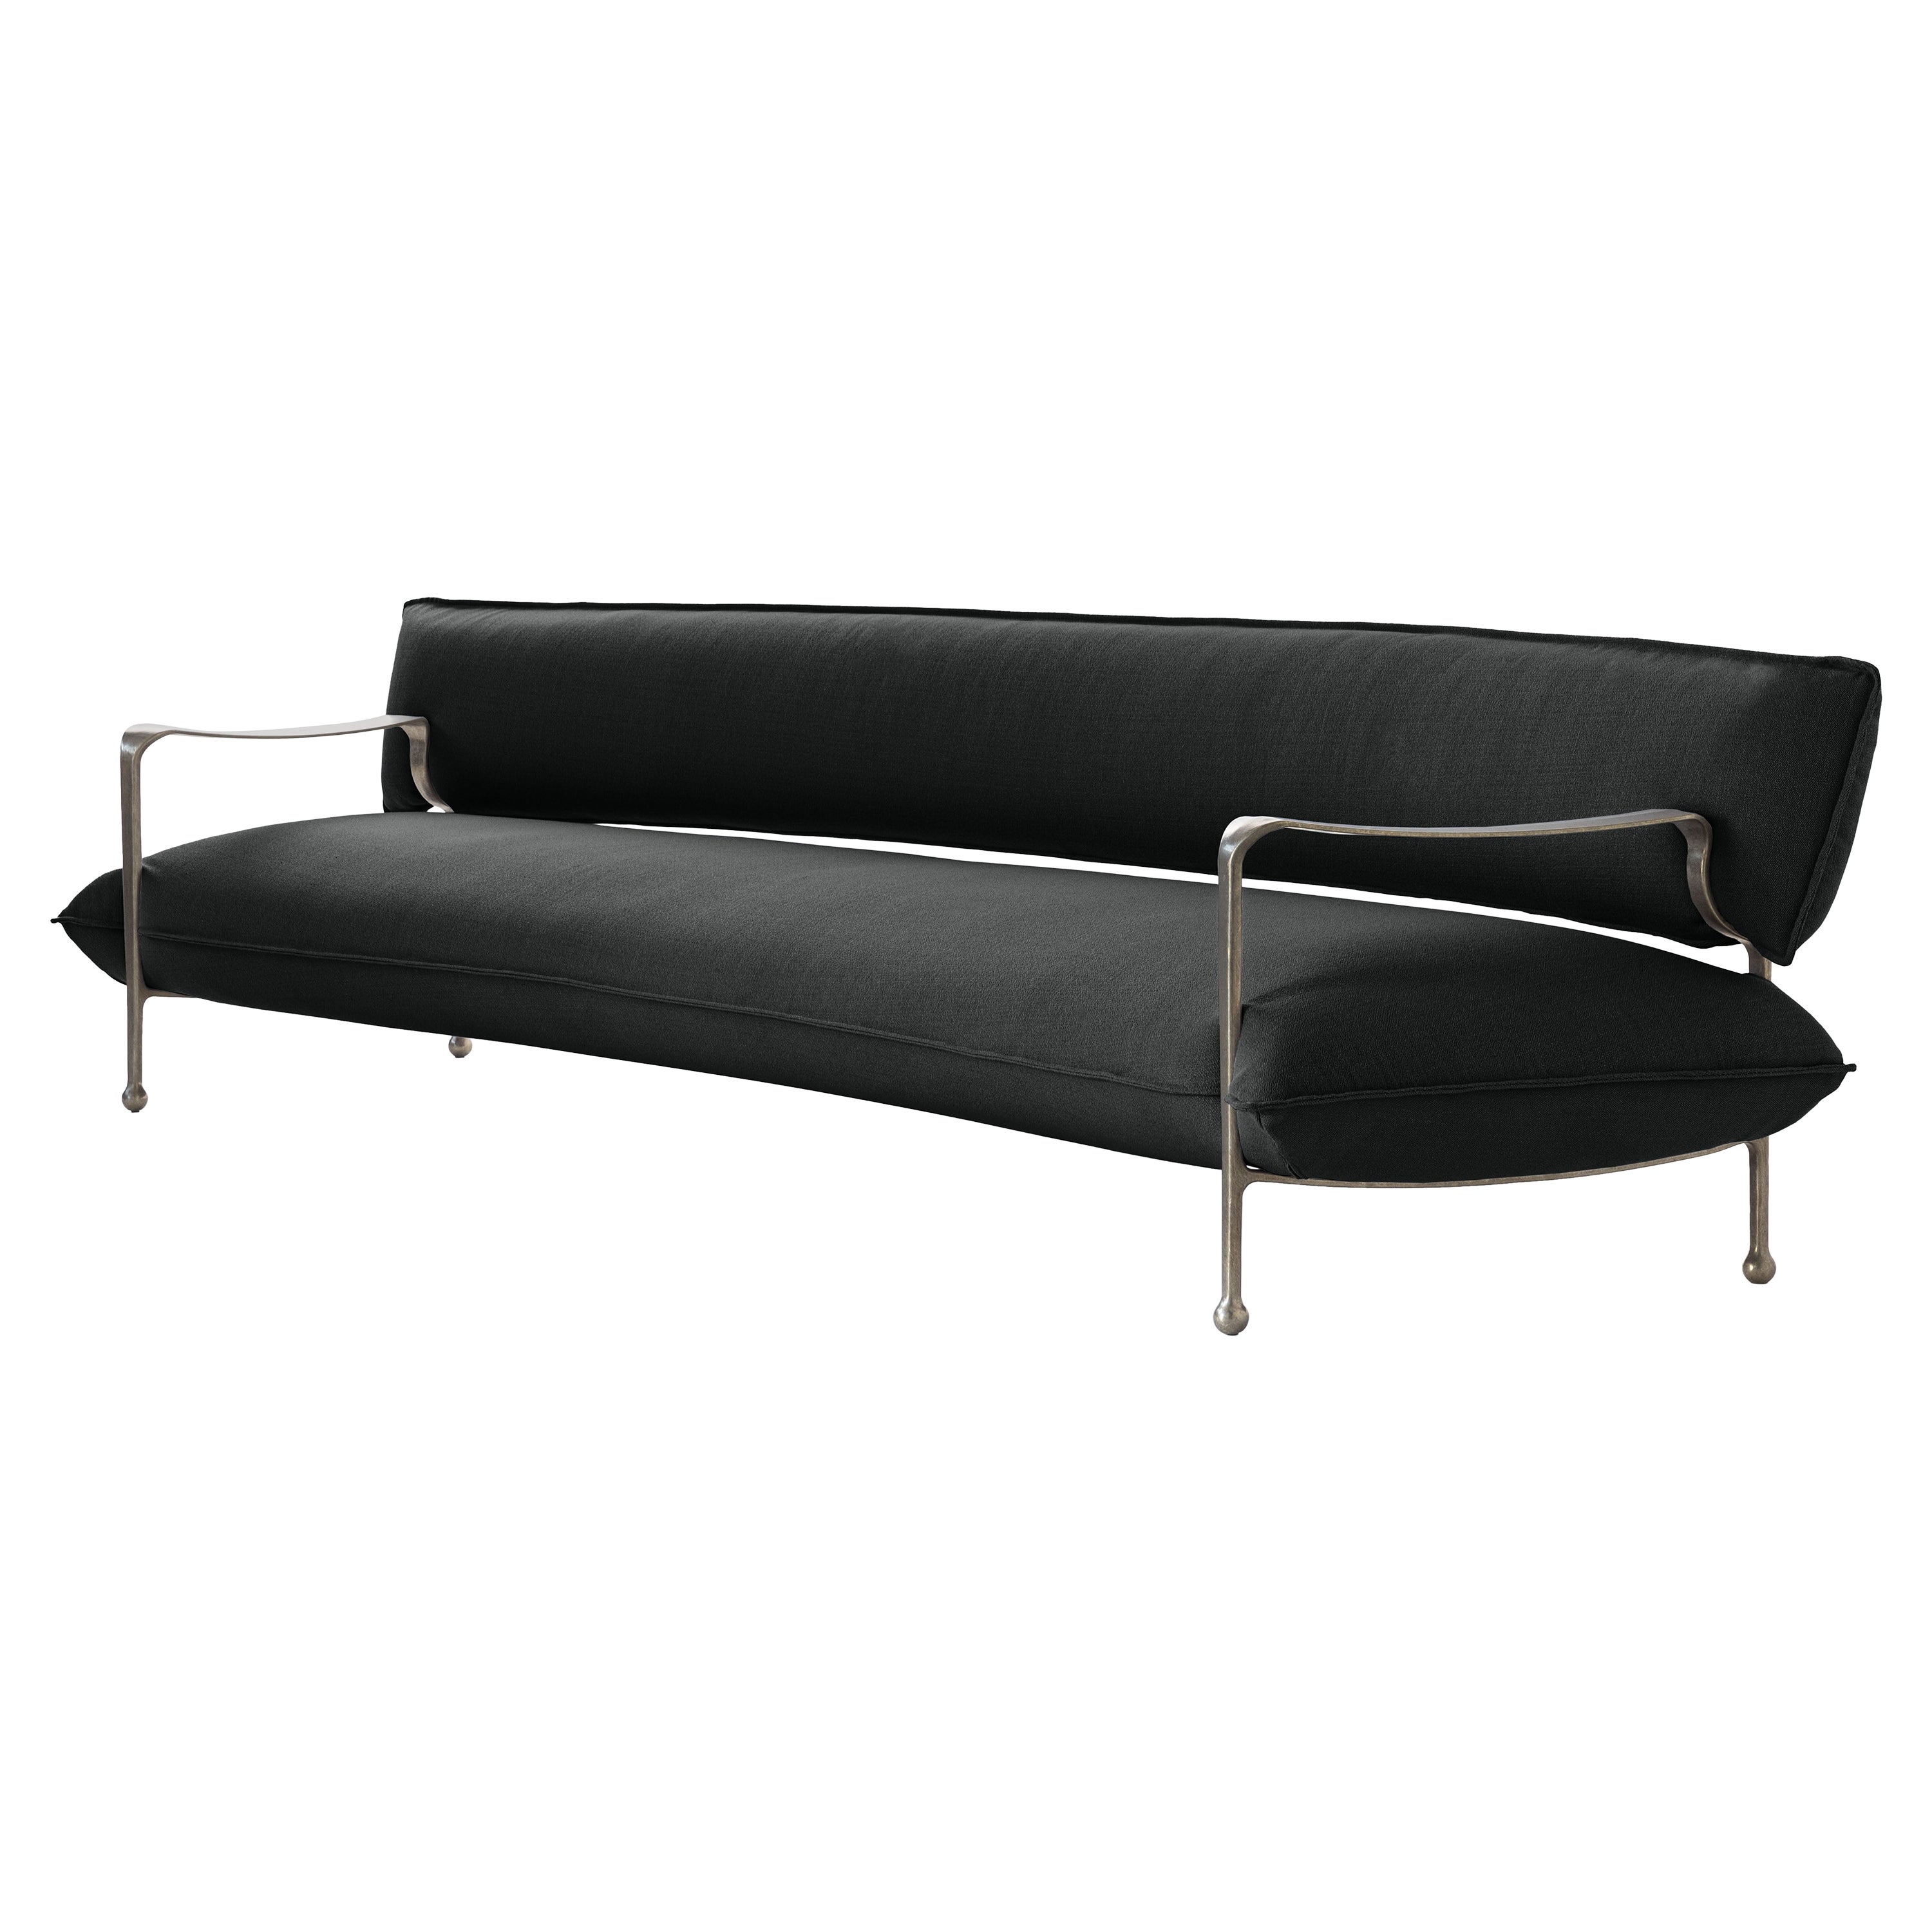 Riace 4 Seater Sofa by Ronan & Erwan Boroullec for MAGIS For Sale